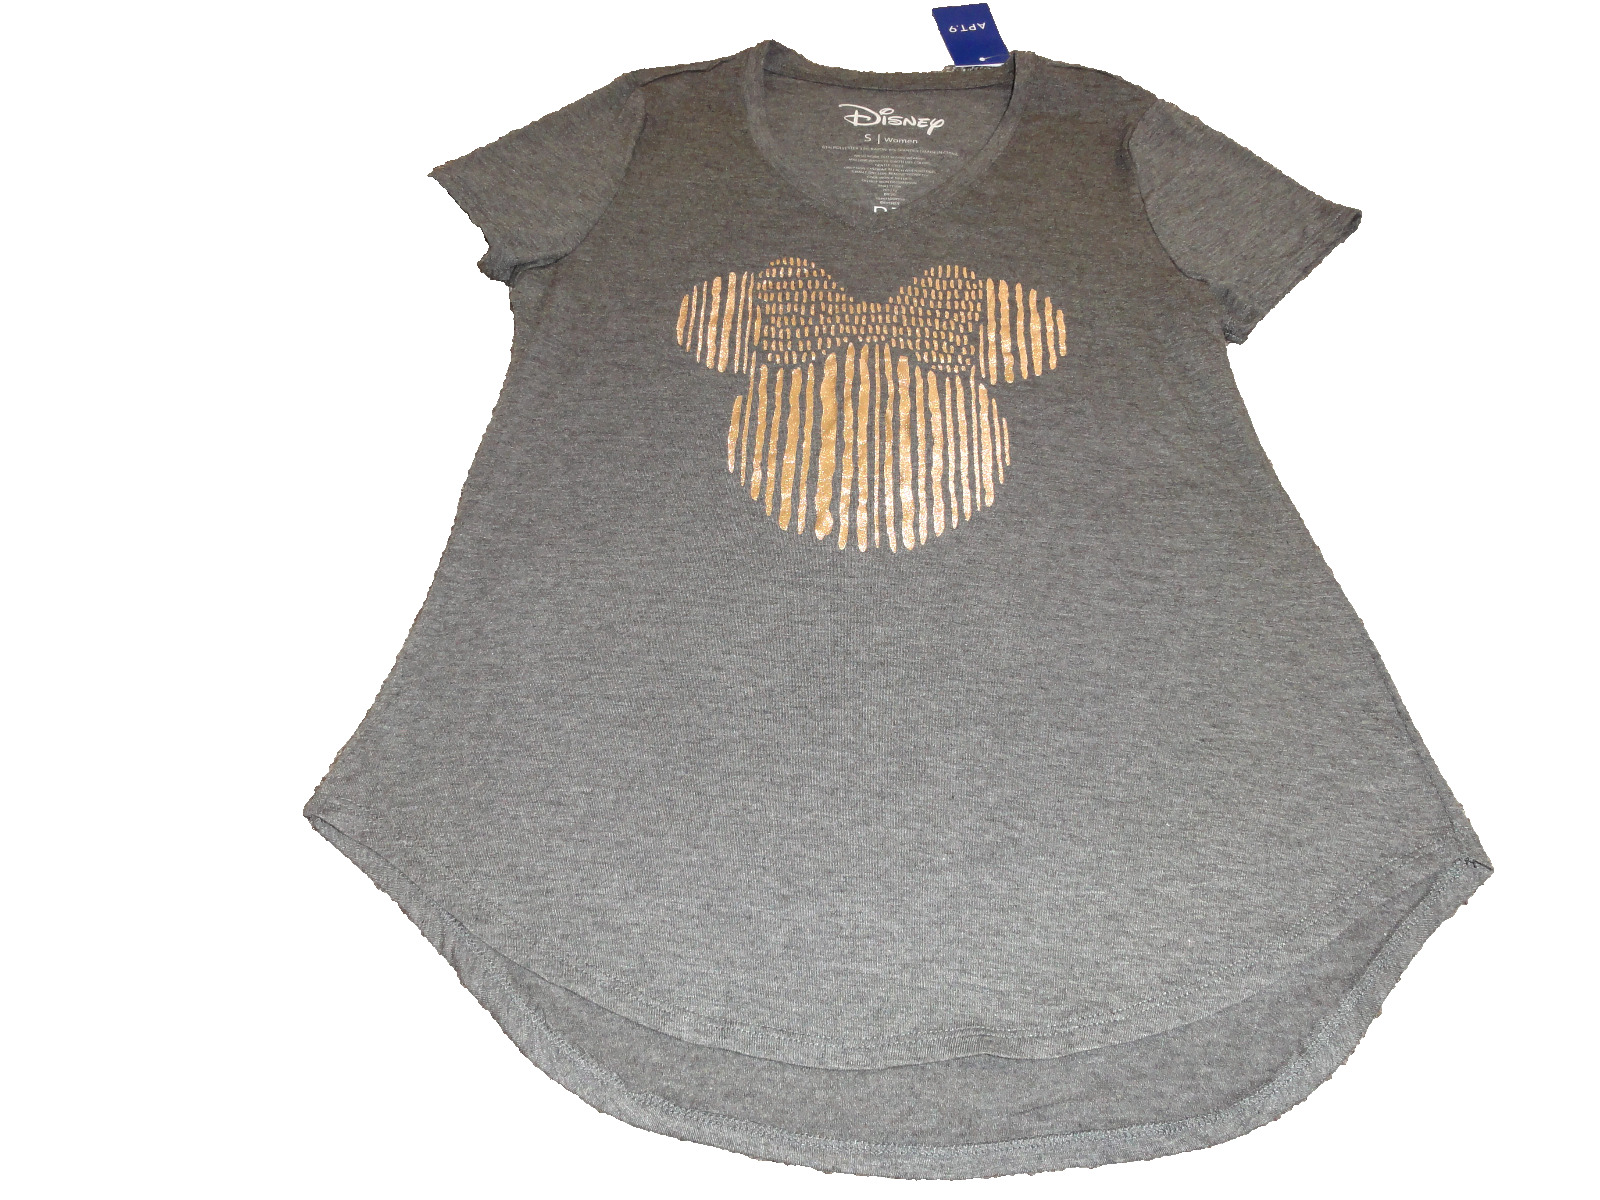 NEW LADIES DISNEY GRAY & GOLD METALLIC MINNIE MOUSE SHIRT SIZE SMALL BY APT.9